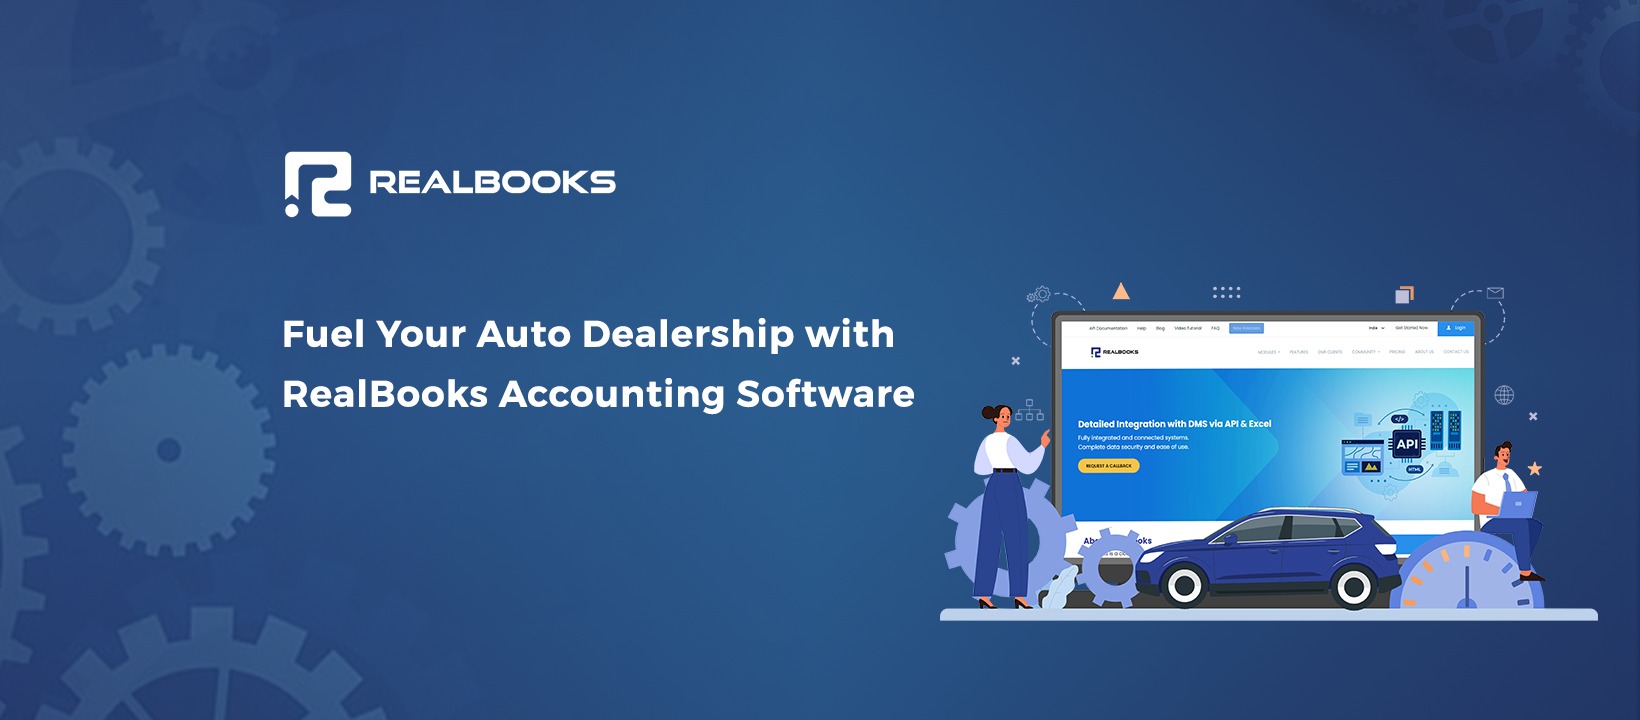 realbooks-auto-dealership-accounting-software